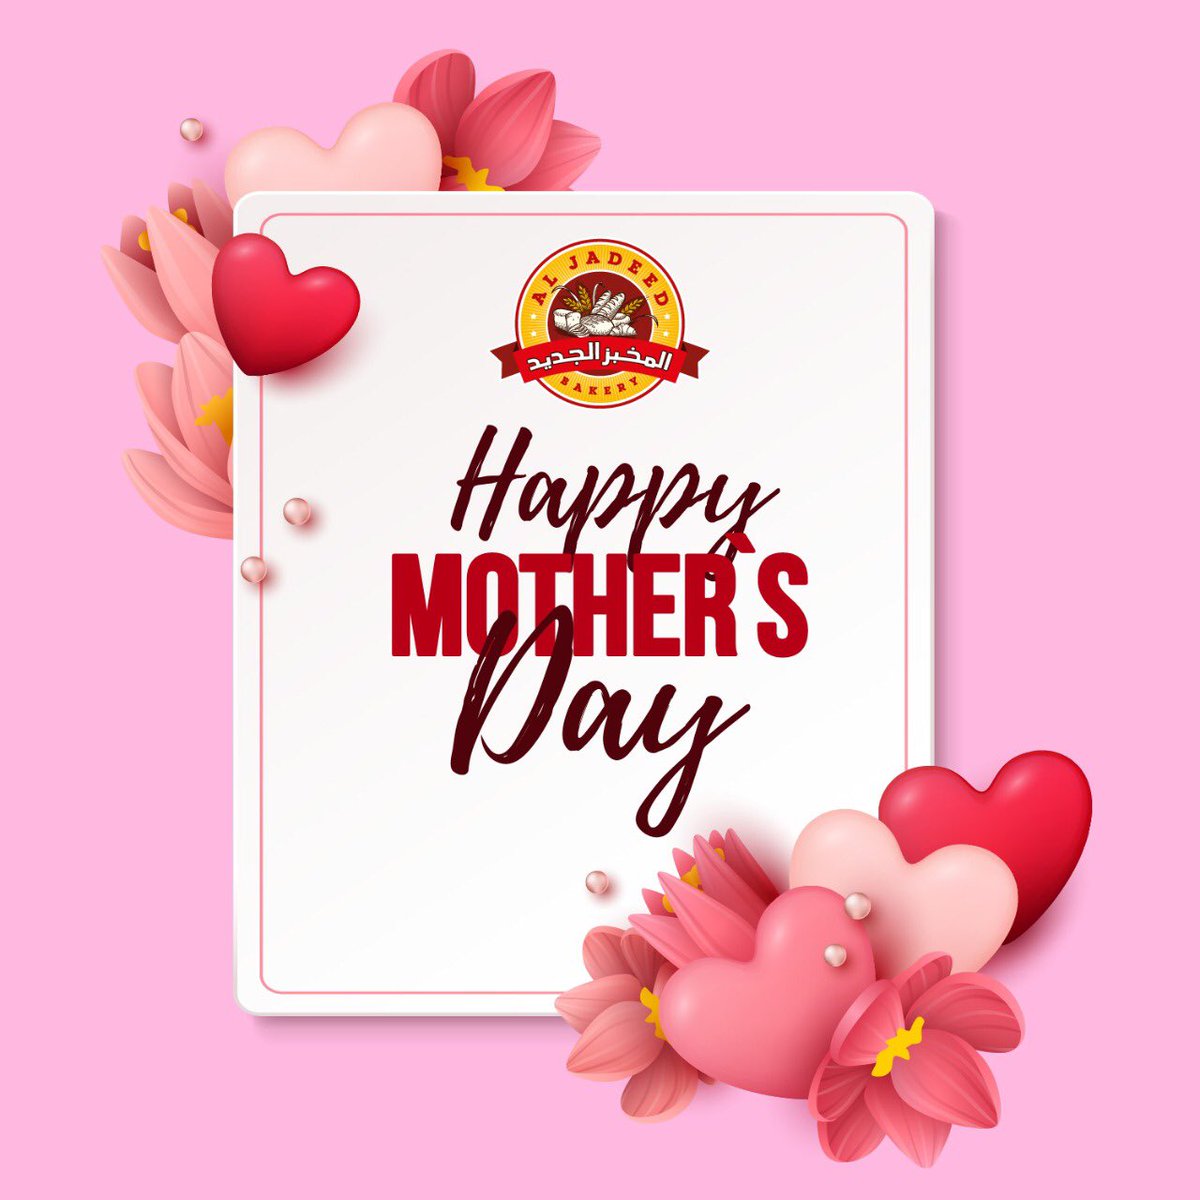 Happy Mother’s Day.
You are special. Al Jadeed Bakery wishes all the mothers a very Happy Mother’s Day on this occasion.
#happymothersday #mothersday #momisspecial